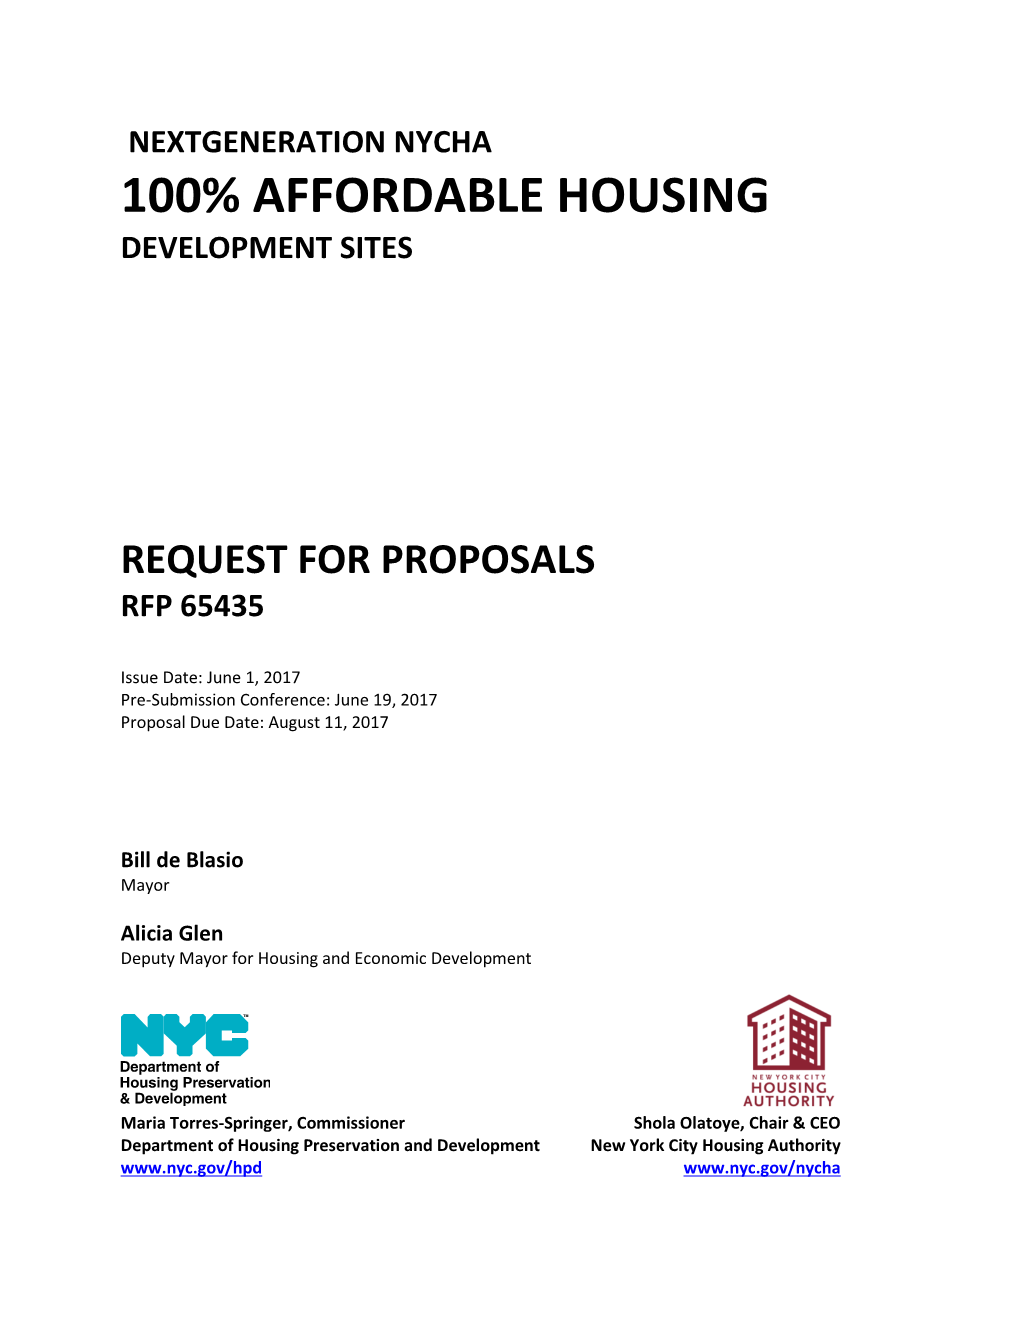 Nextgeneration Nycha 100% Affordable Housing Development Sites Request for Proposals Rfp 65435